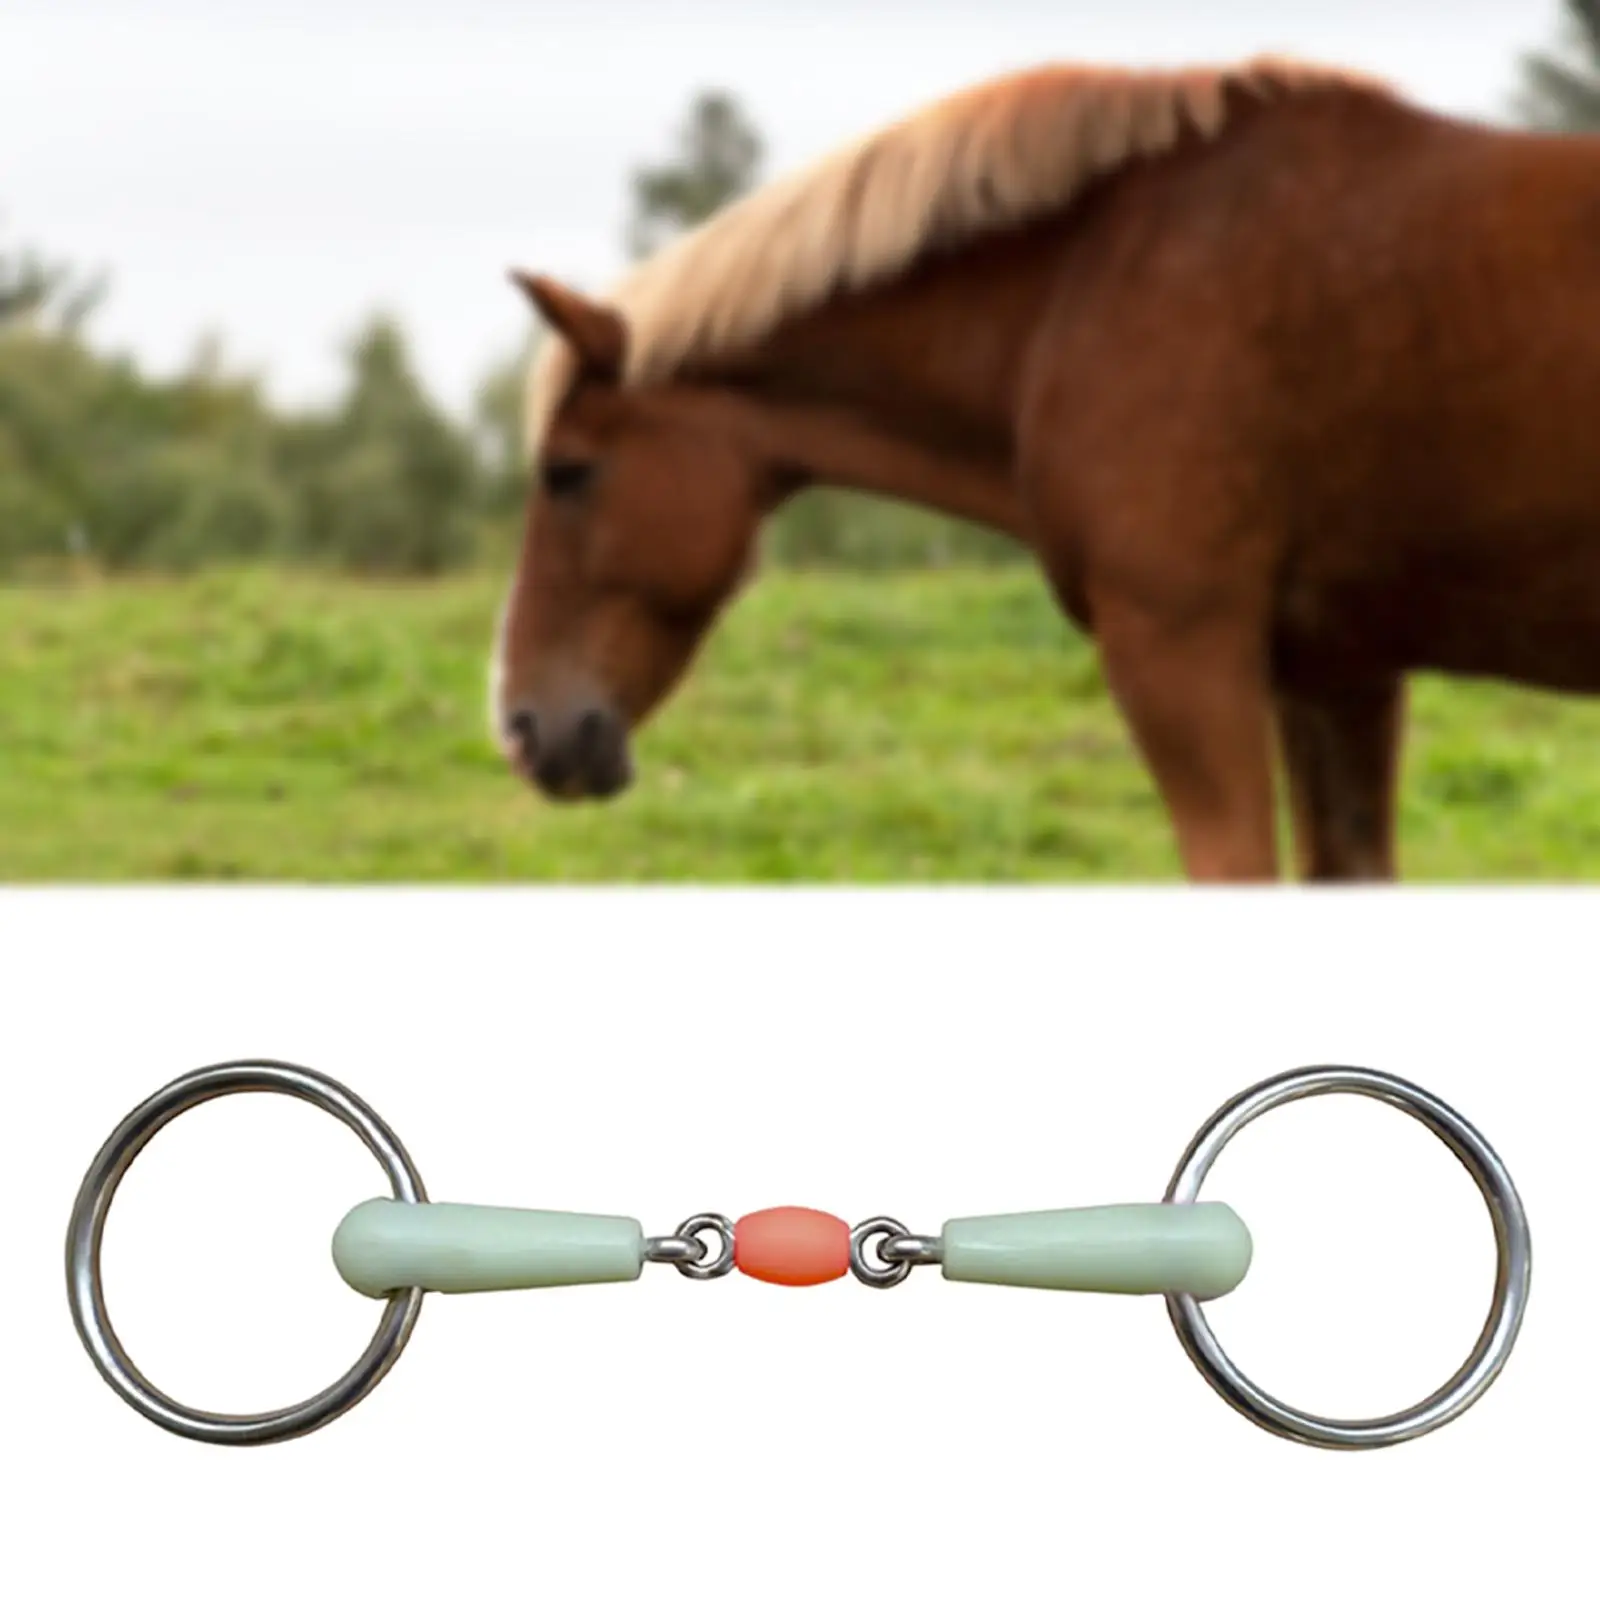 Horse Mouth Bit Round Comfort Hollow Flavor Link Supplies for Equipment Training